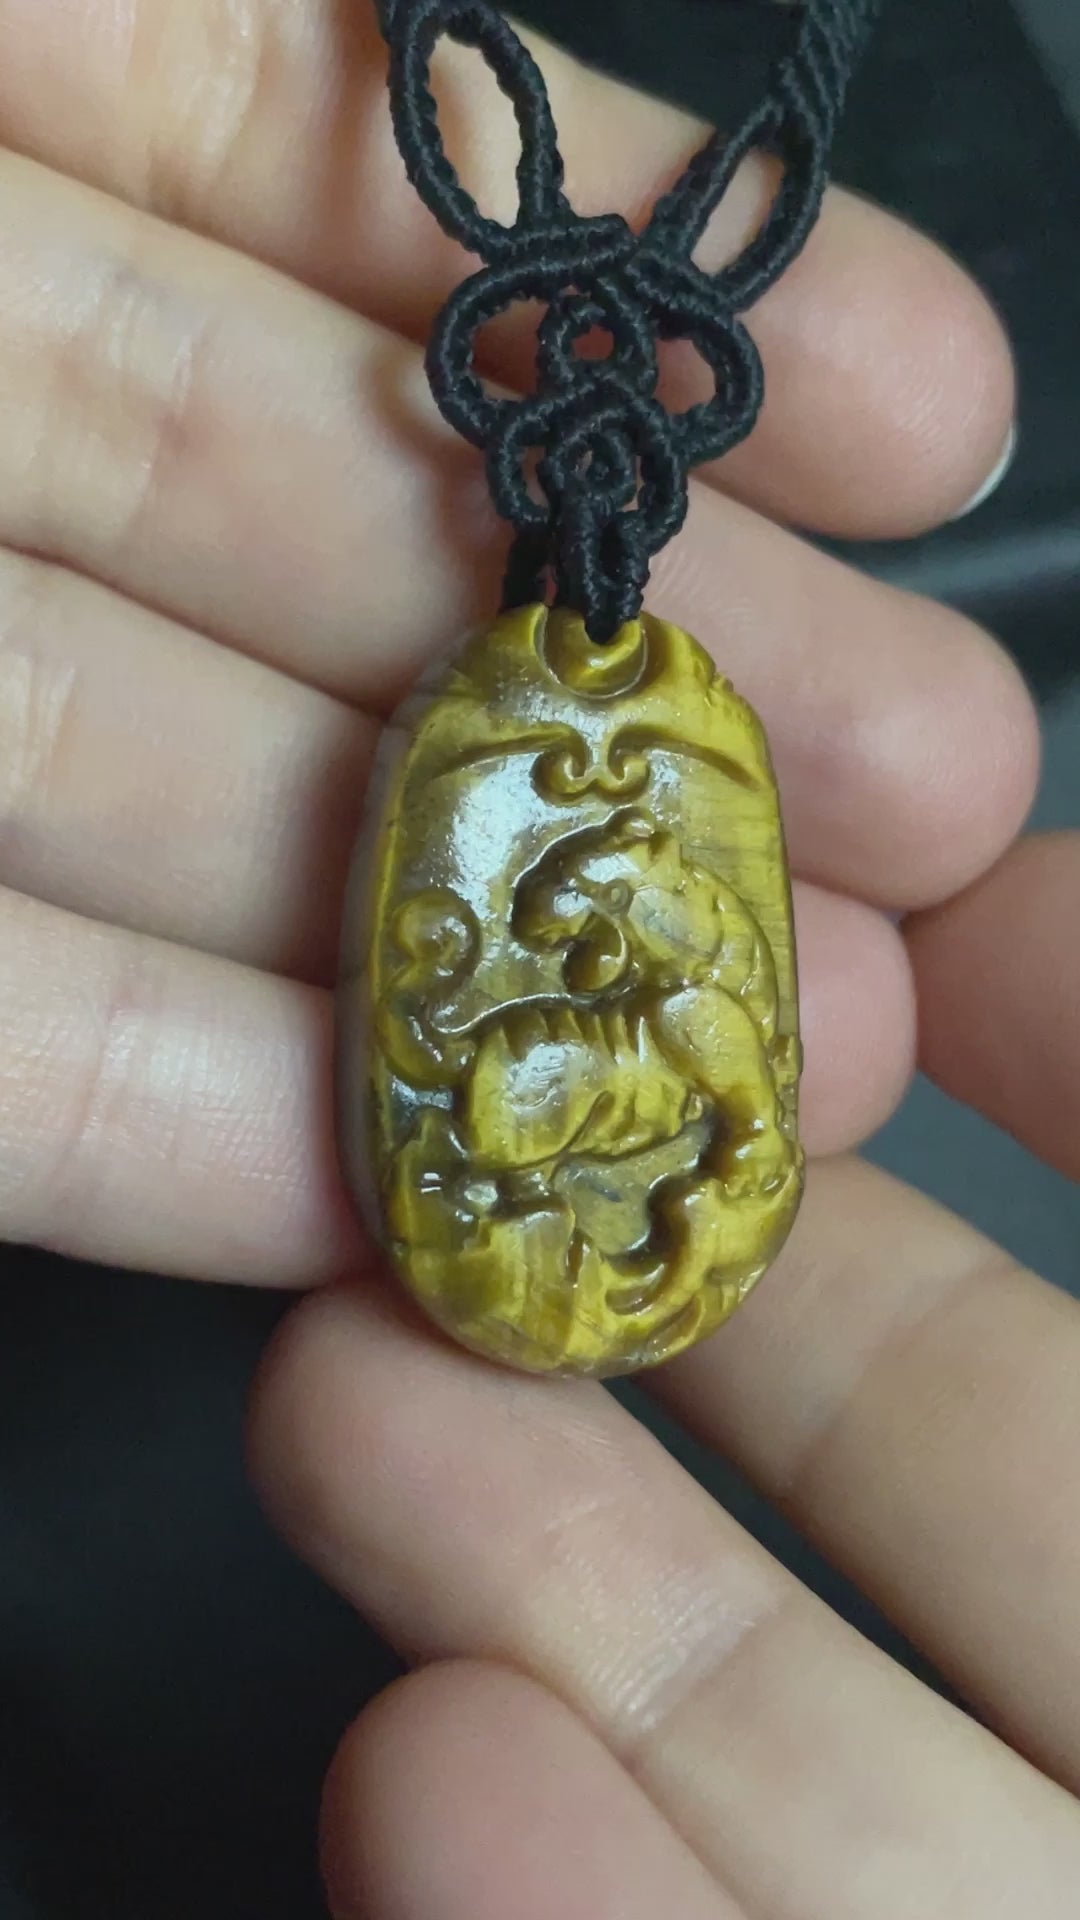 A picture of a tiger pendant carved out of tiger's eye stone. The pendant is on an intricate black macrame necklace.